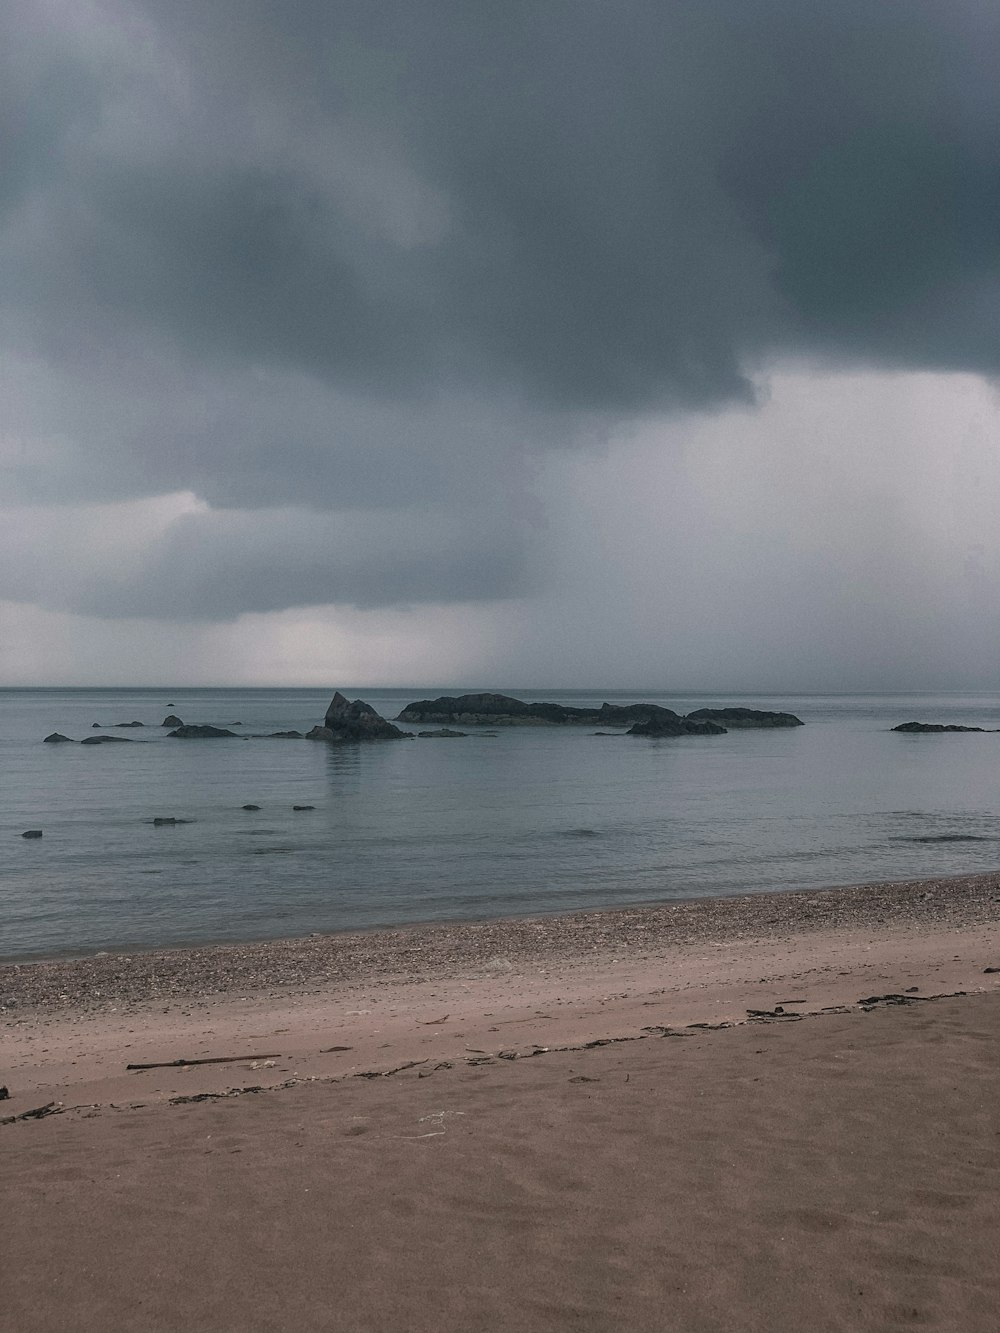 a person walking on a beach under a cloudy sky